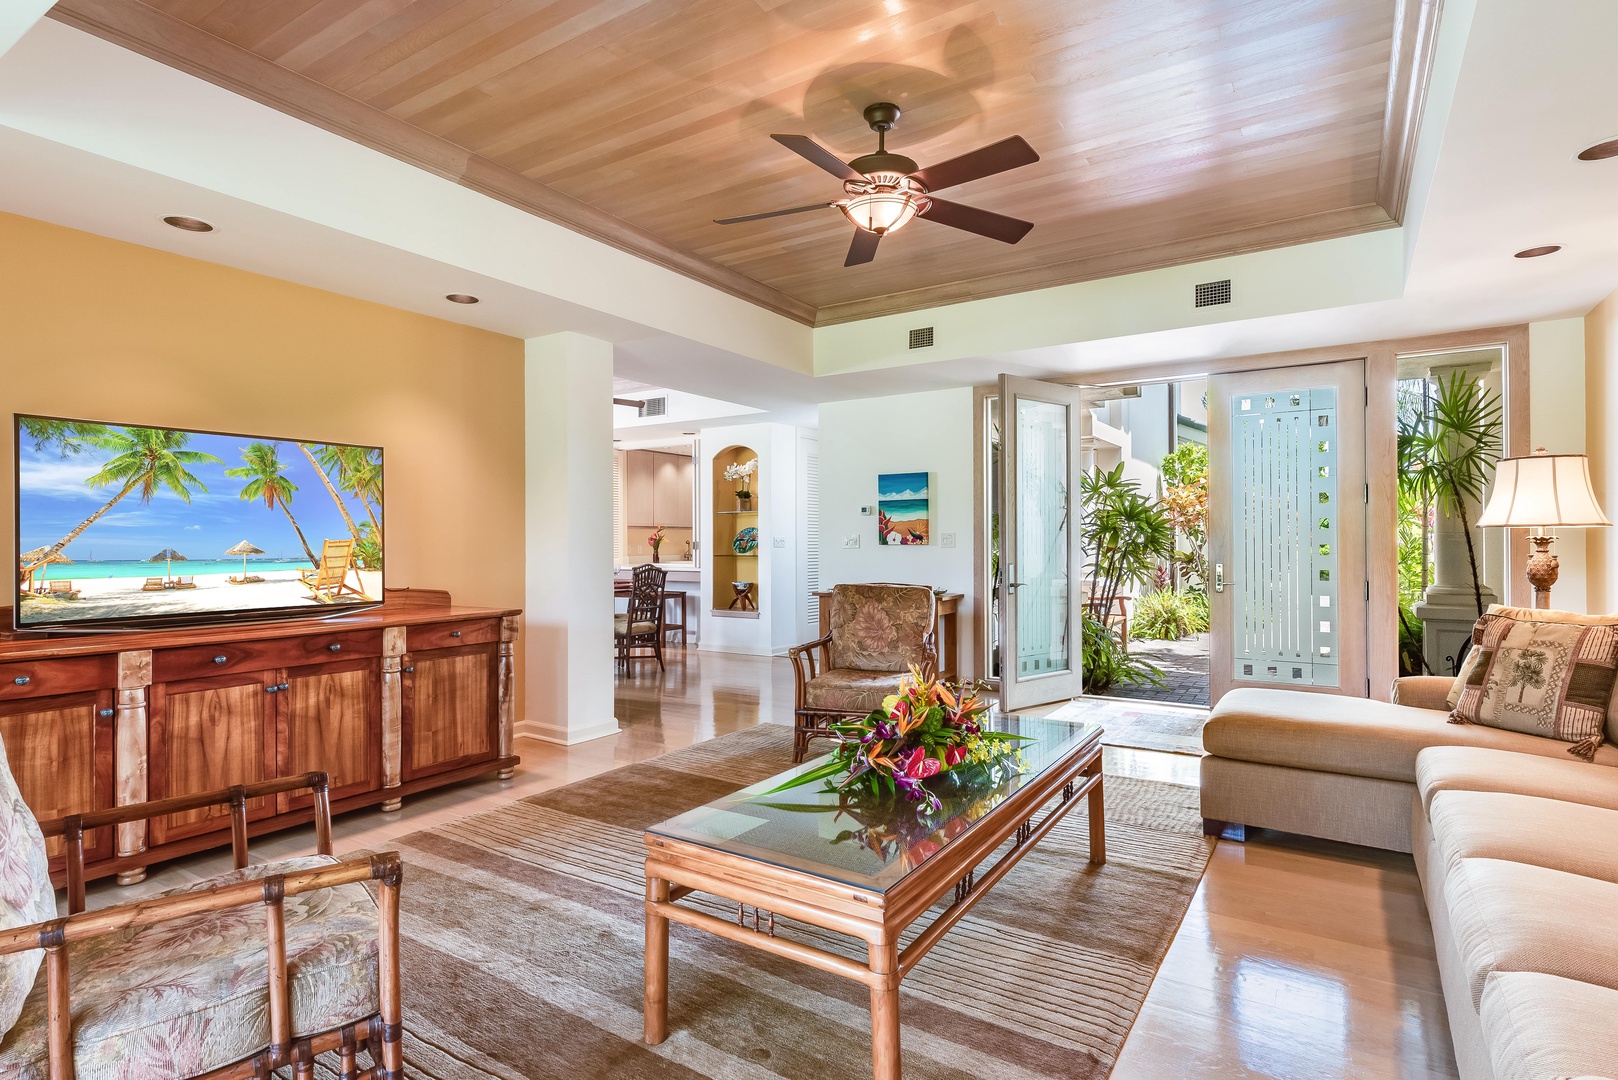 Kamuela Vacation Rentals, The Islands D3 - Living Room Features Large Flat-Screen Smart TV and Gorgeous Etched Glass Double Doors